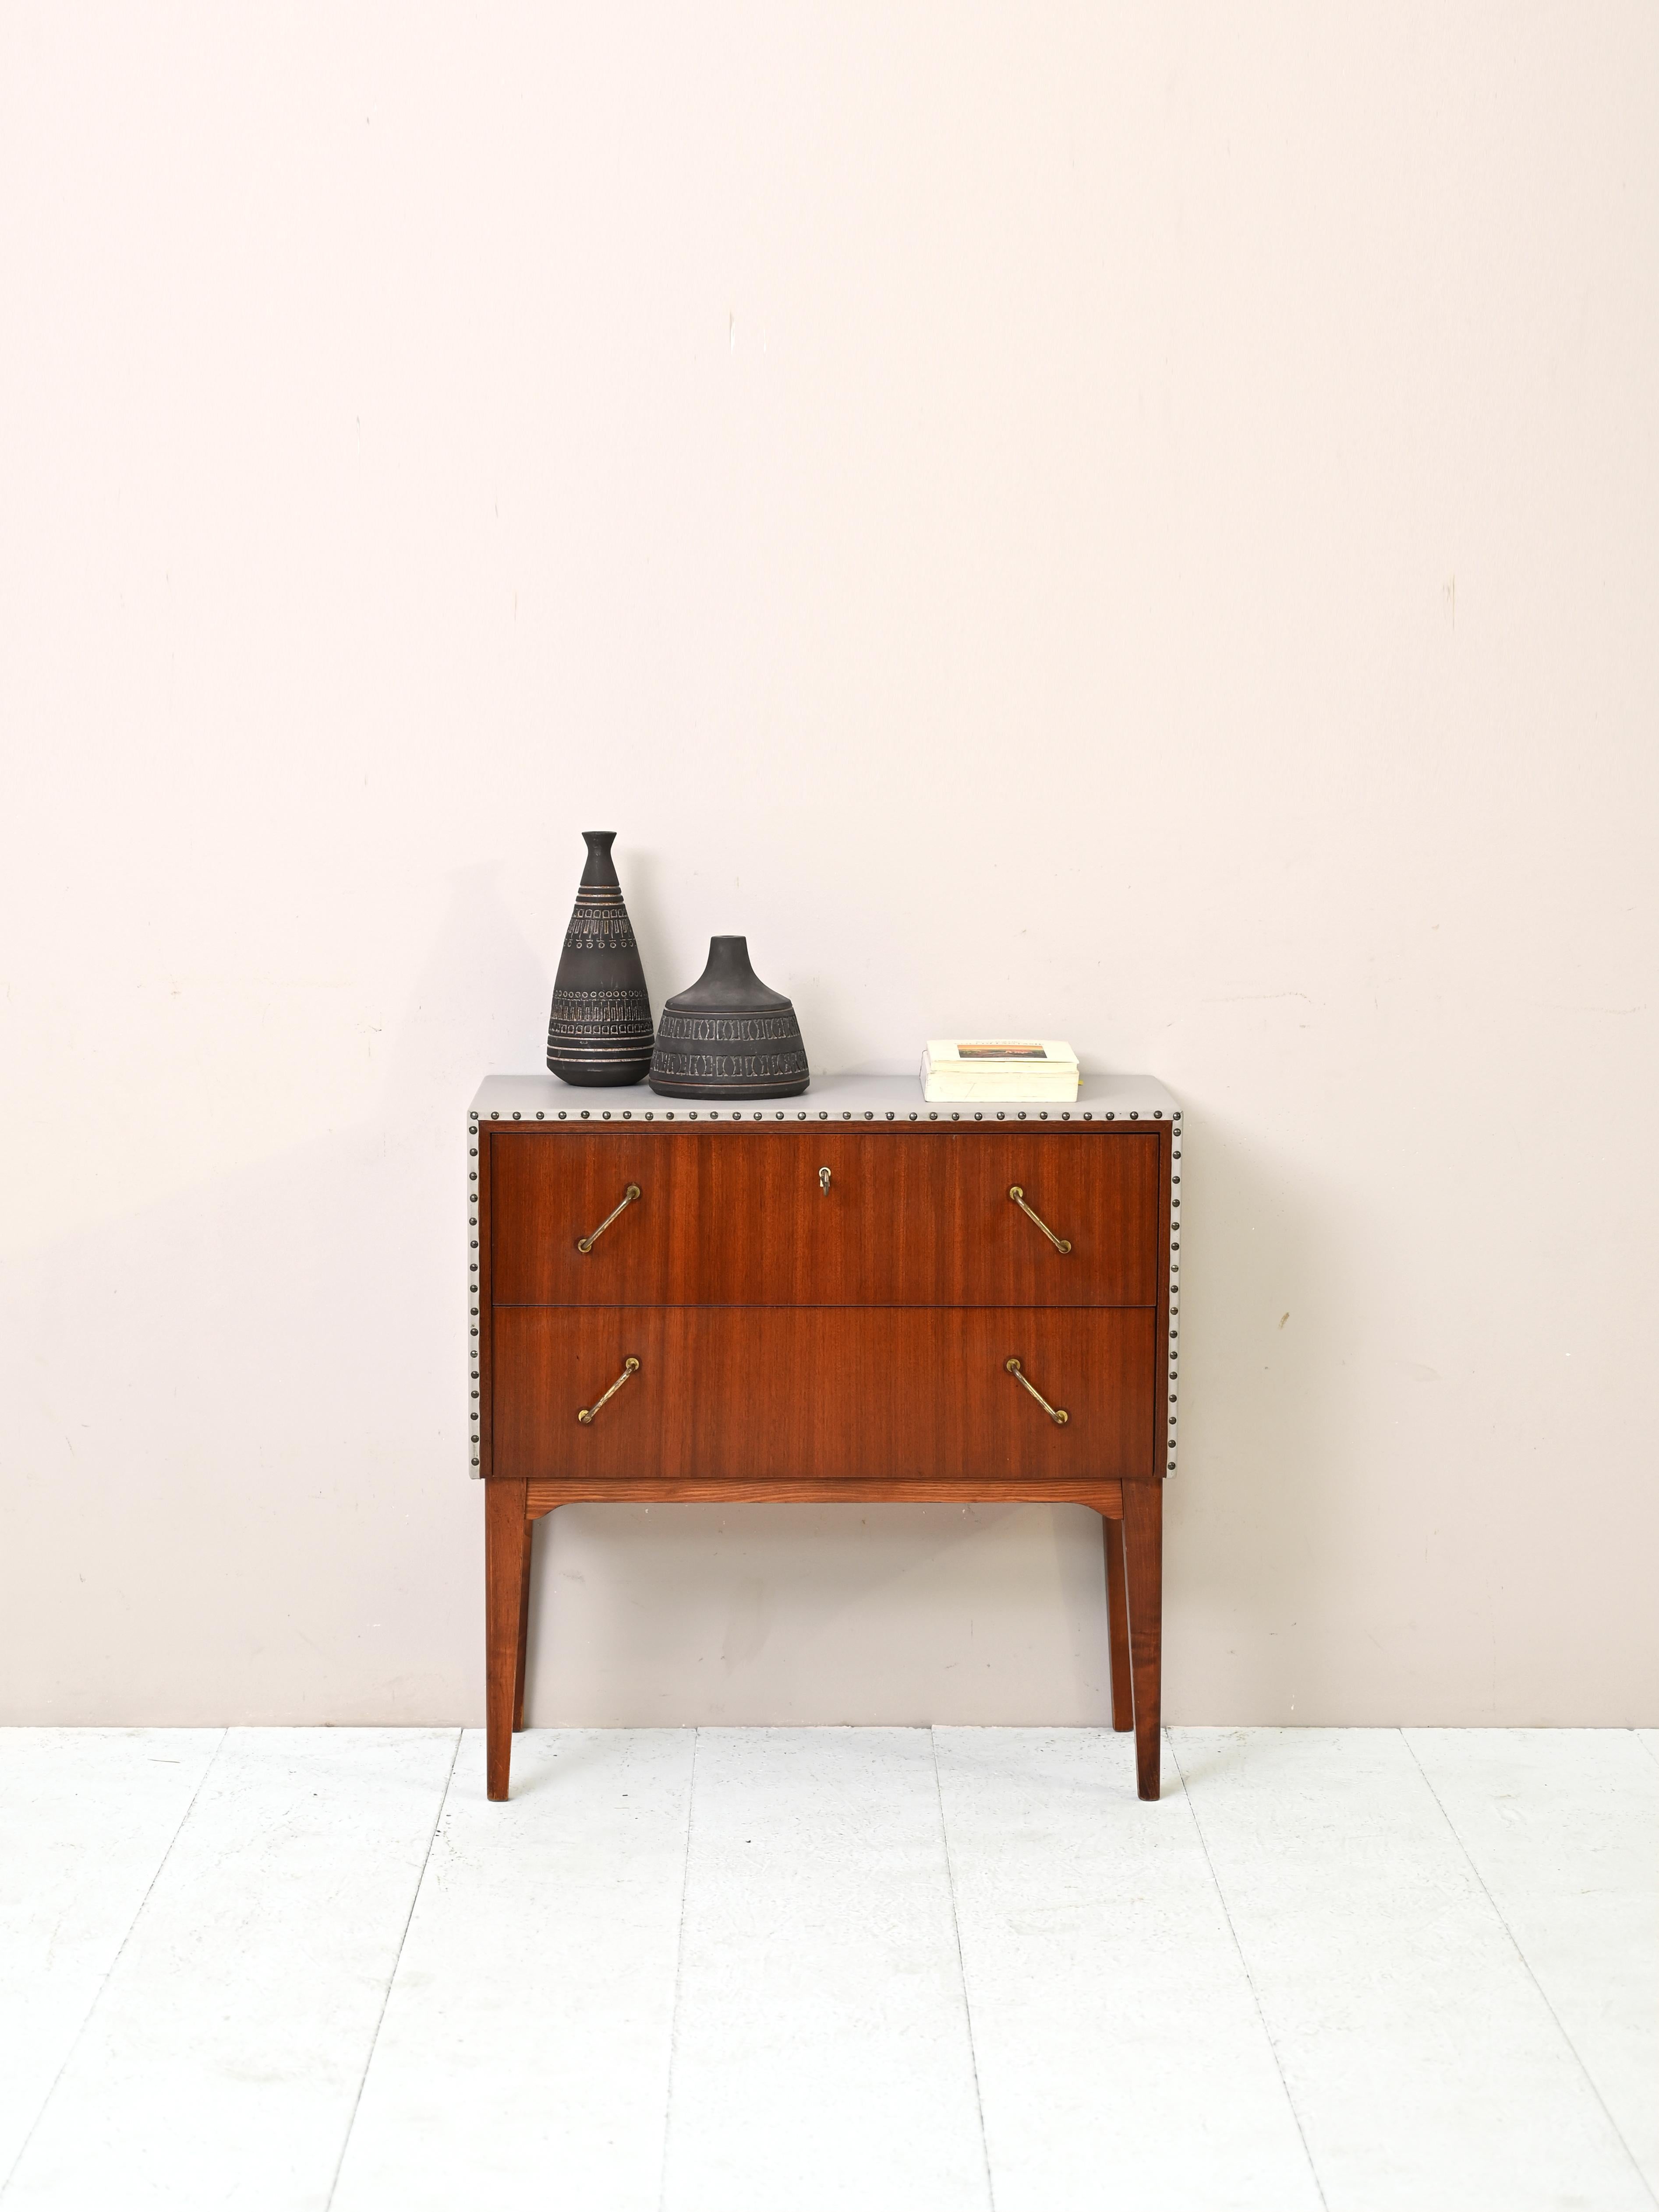 Small chest of drawers/bedside table of Nordic manufacture produced in the 1950s.

The entryway cabinet features cream-colored leatherette upholstery on the top and sides. The small metal studs drawing the front edge recall the handles.

An